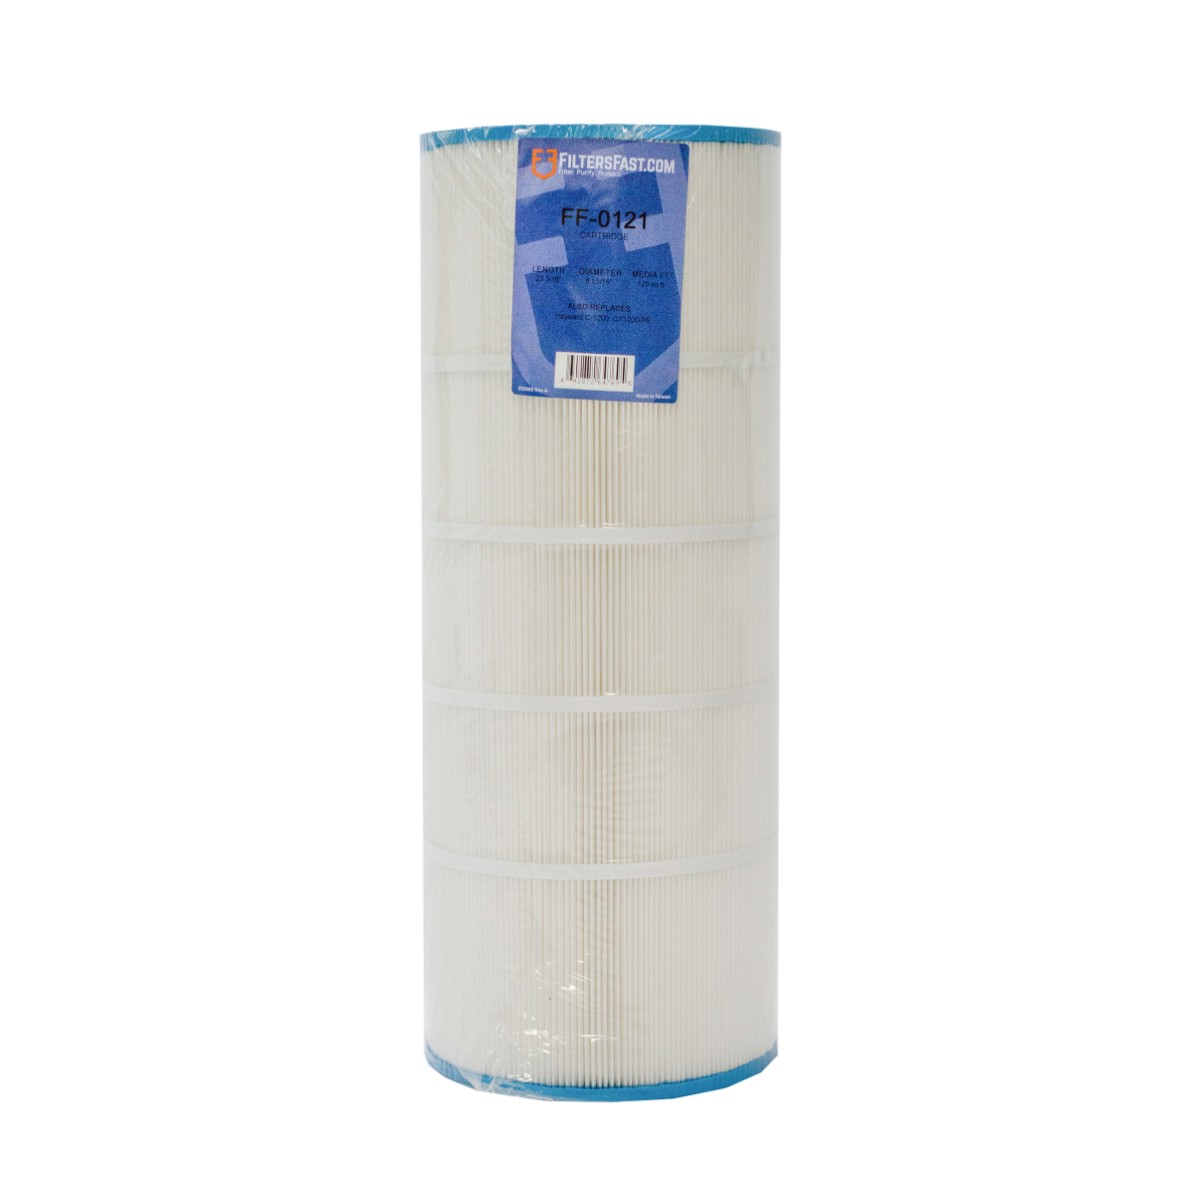 FiltersFast FF-0121 Replacement Filter For Filbur FC-1293